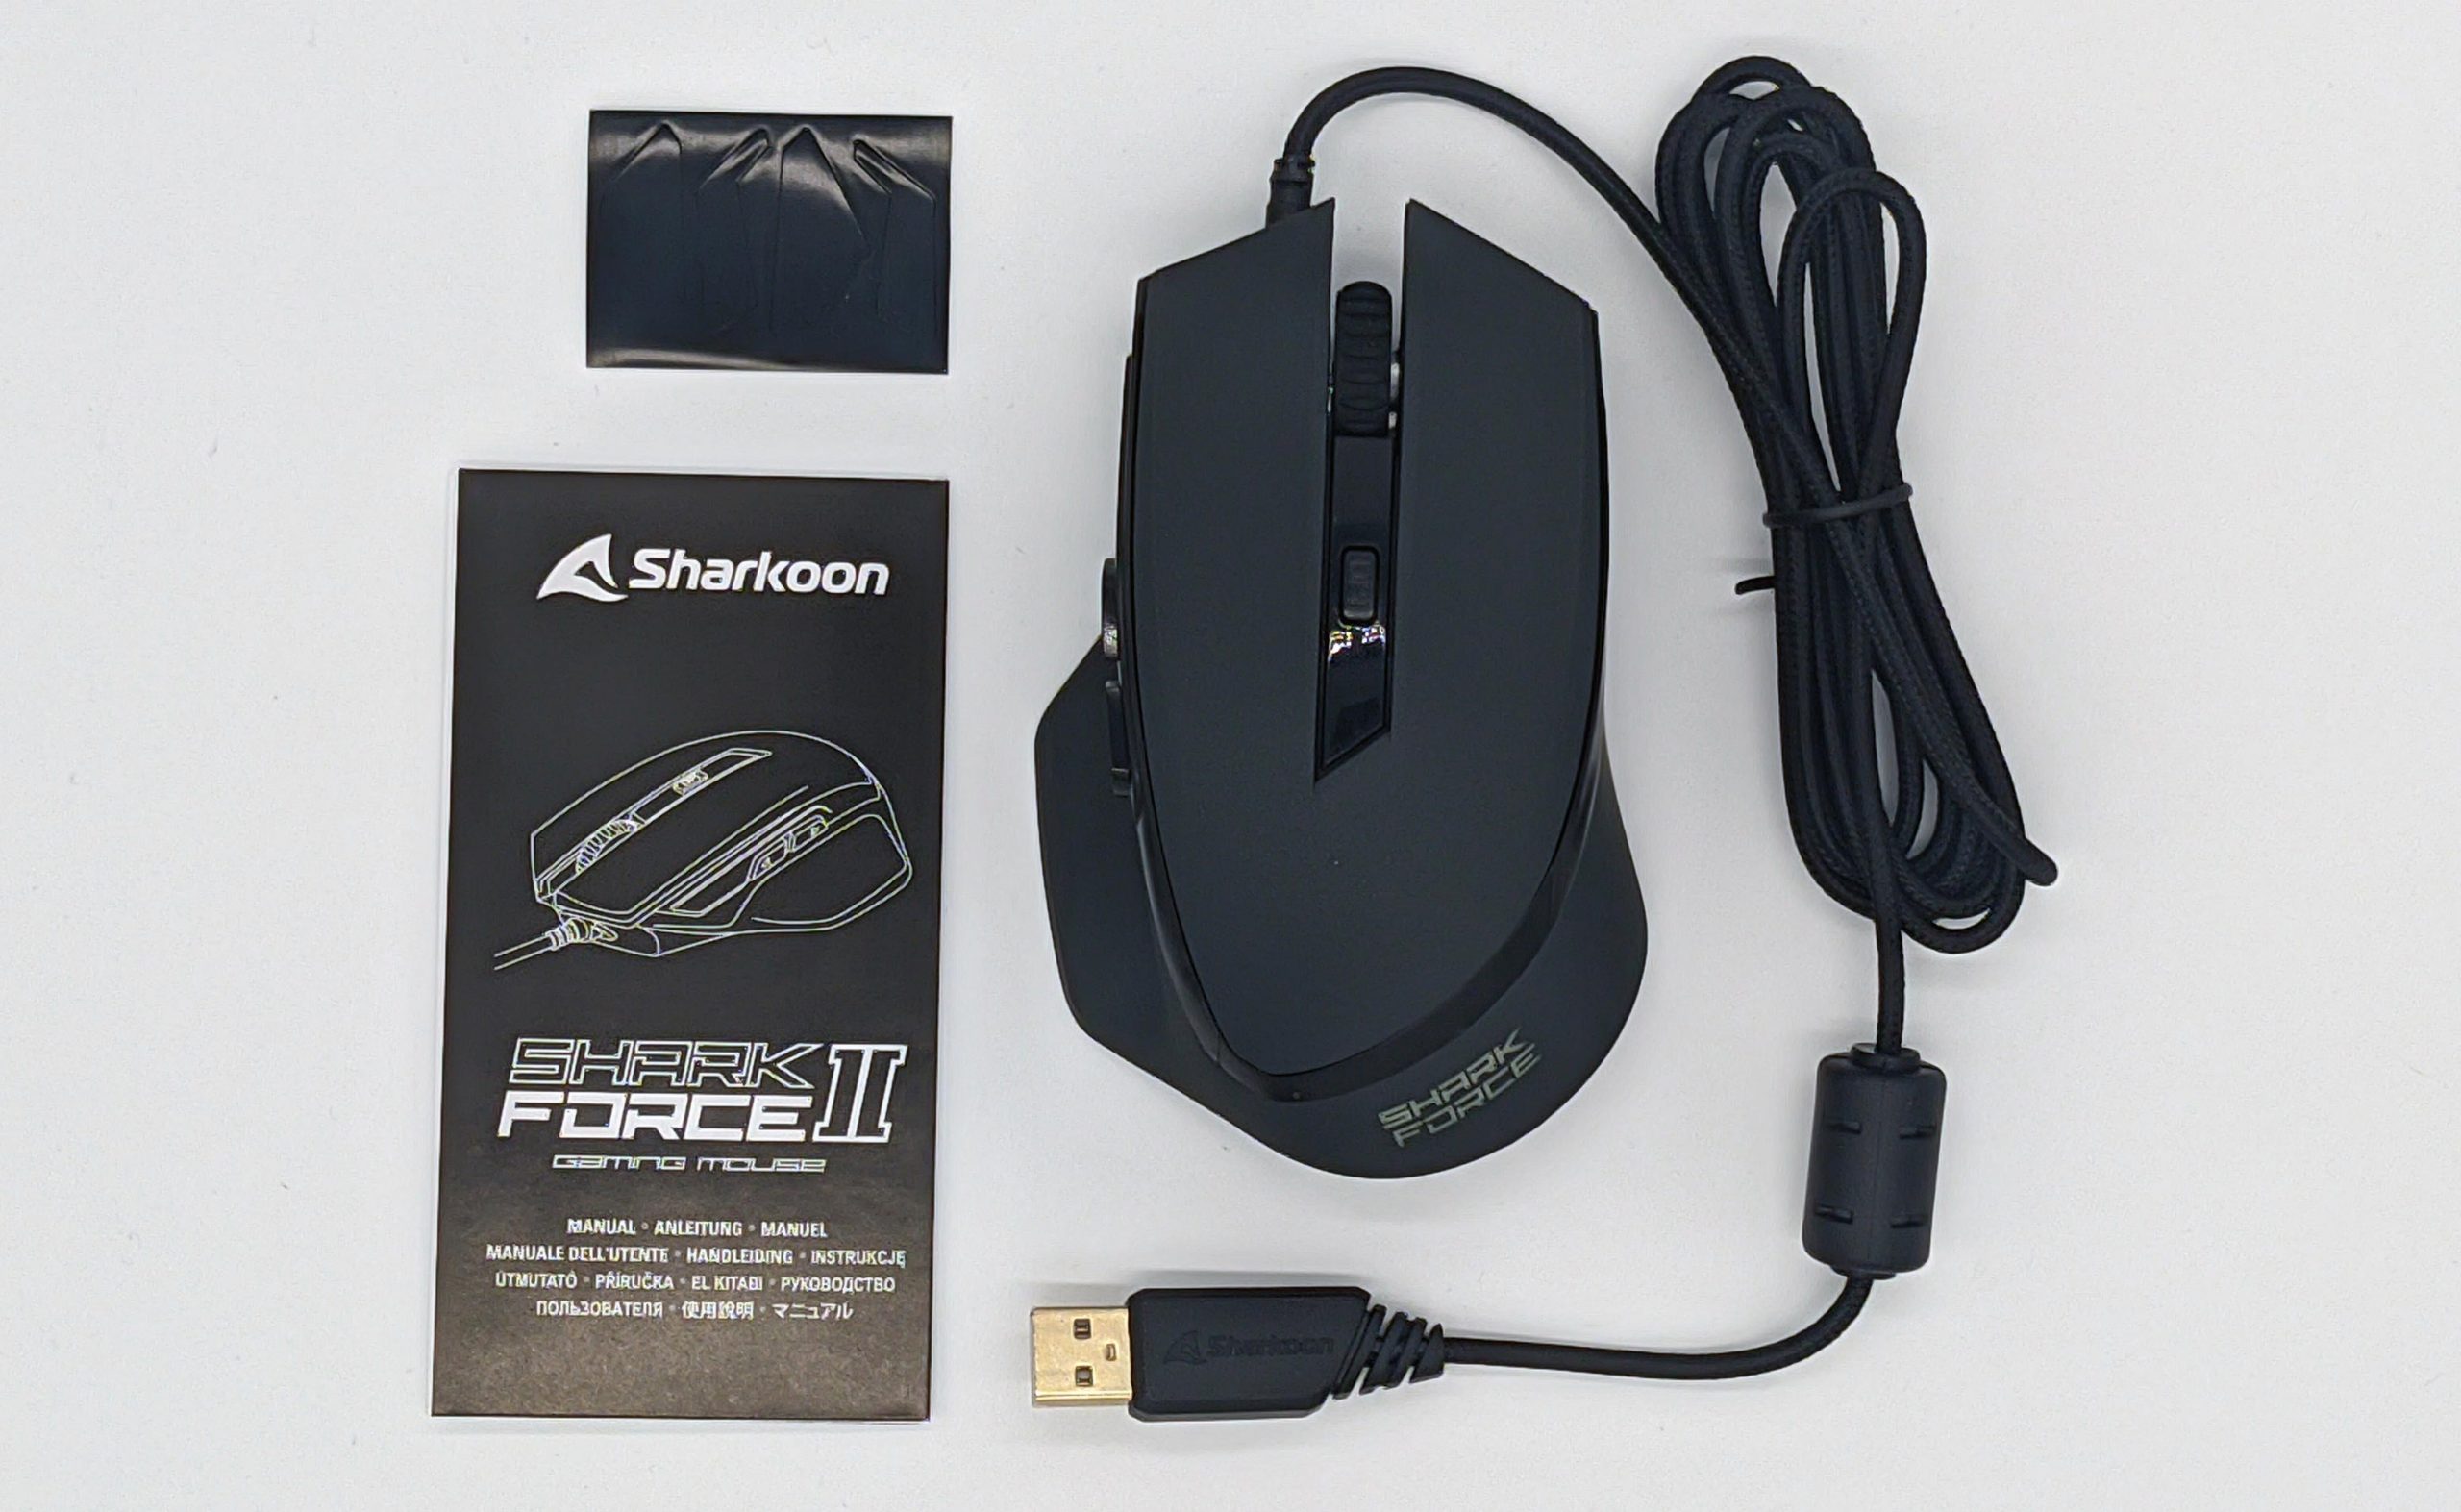 Review Force Shark igor´sLAB | Cheap? II Price Mouse | - just 9-Euro-Bargain or Cheap inspector Sharkoon